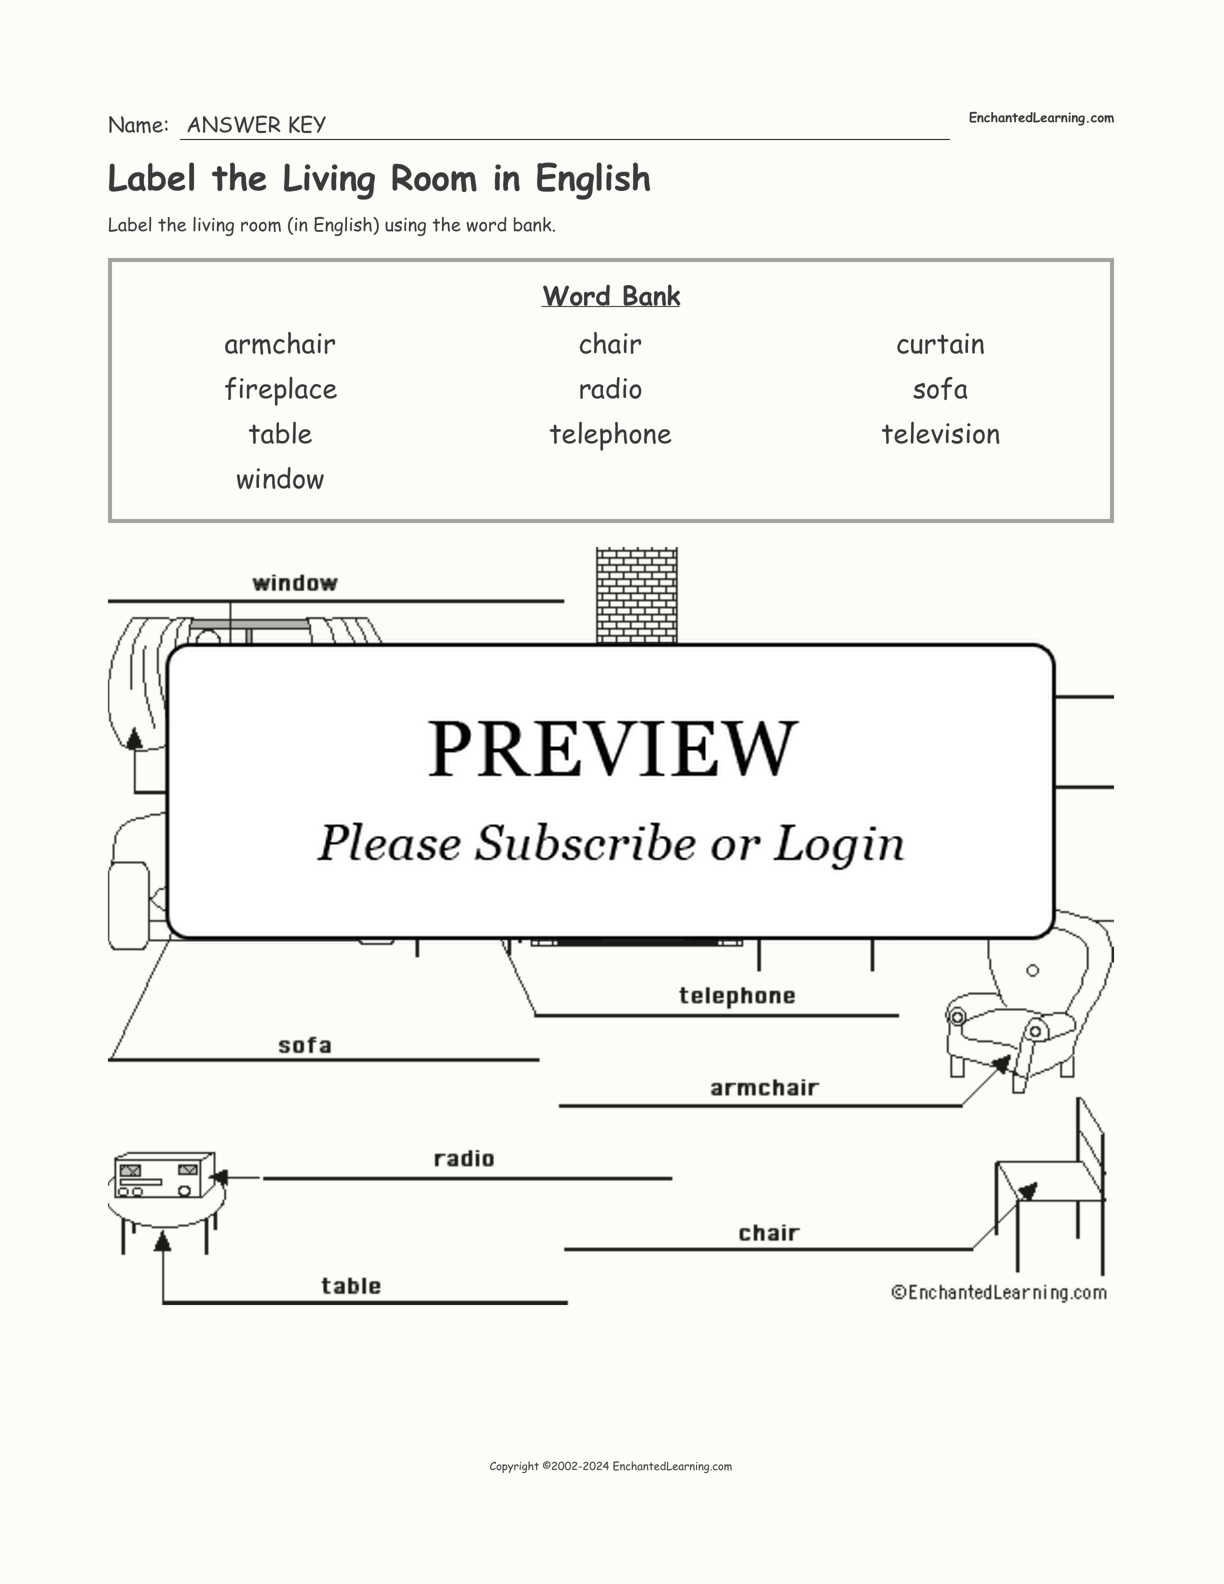 Label the Living Room in English interactive worksheet page 2